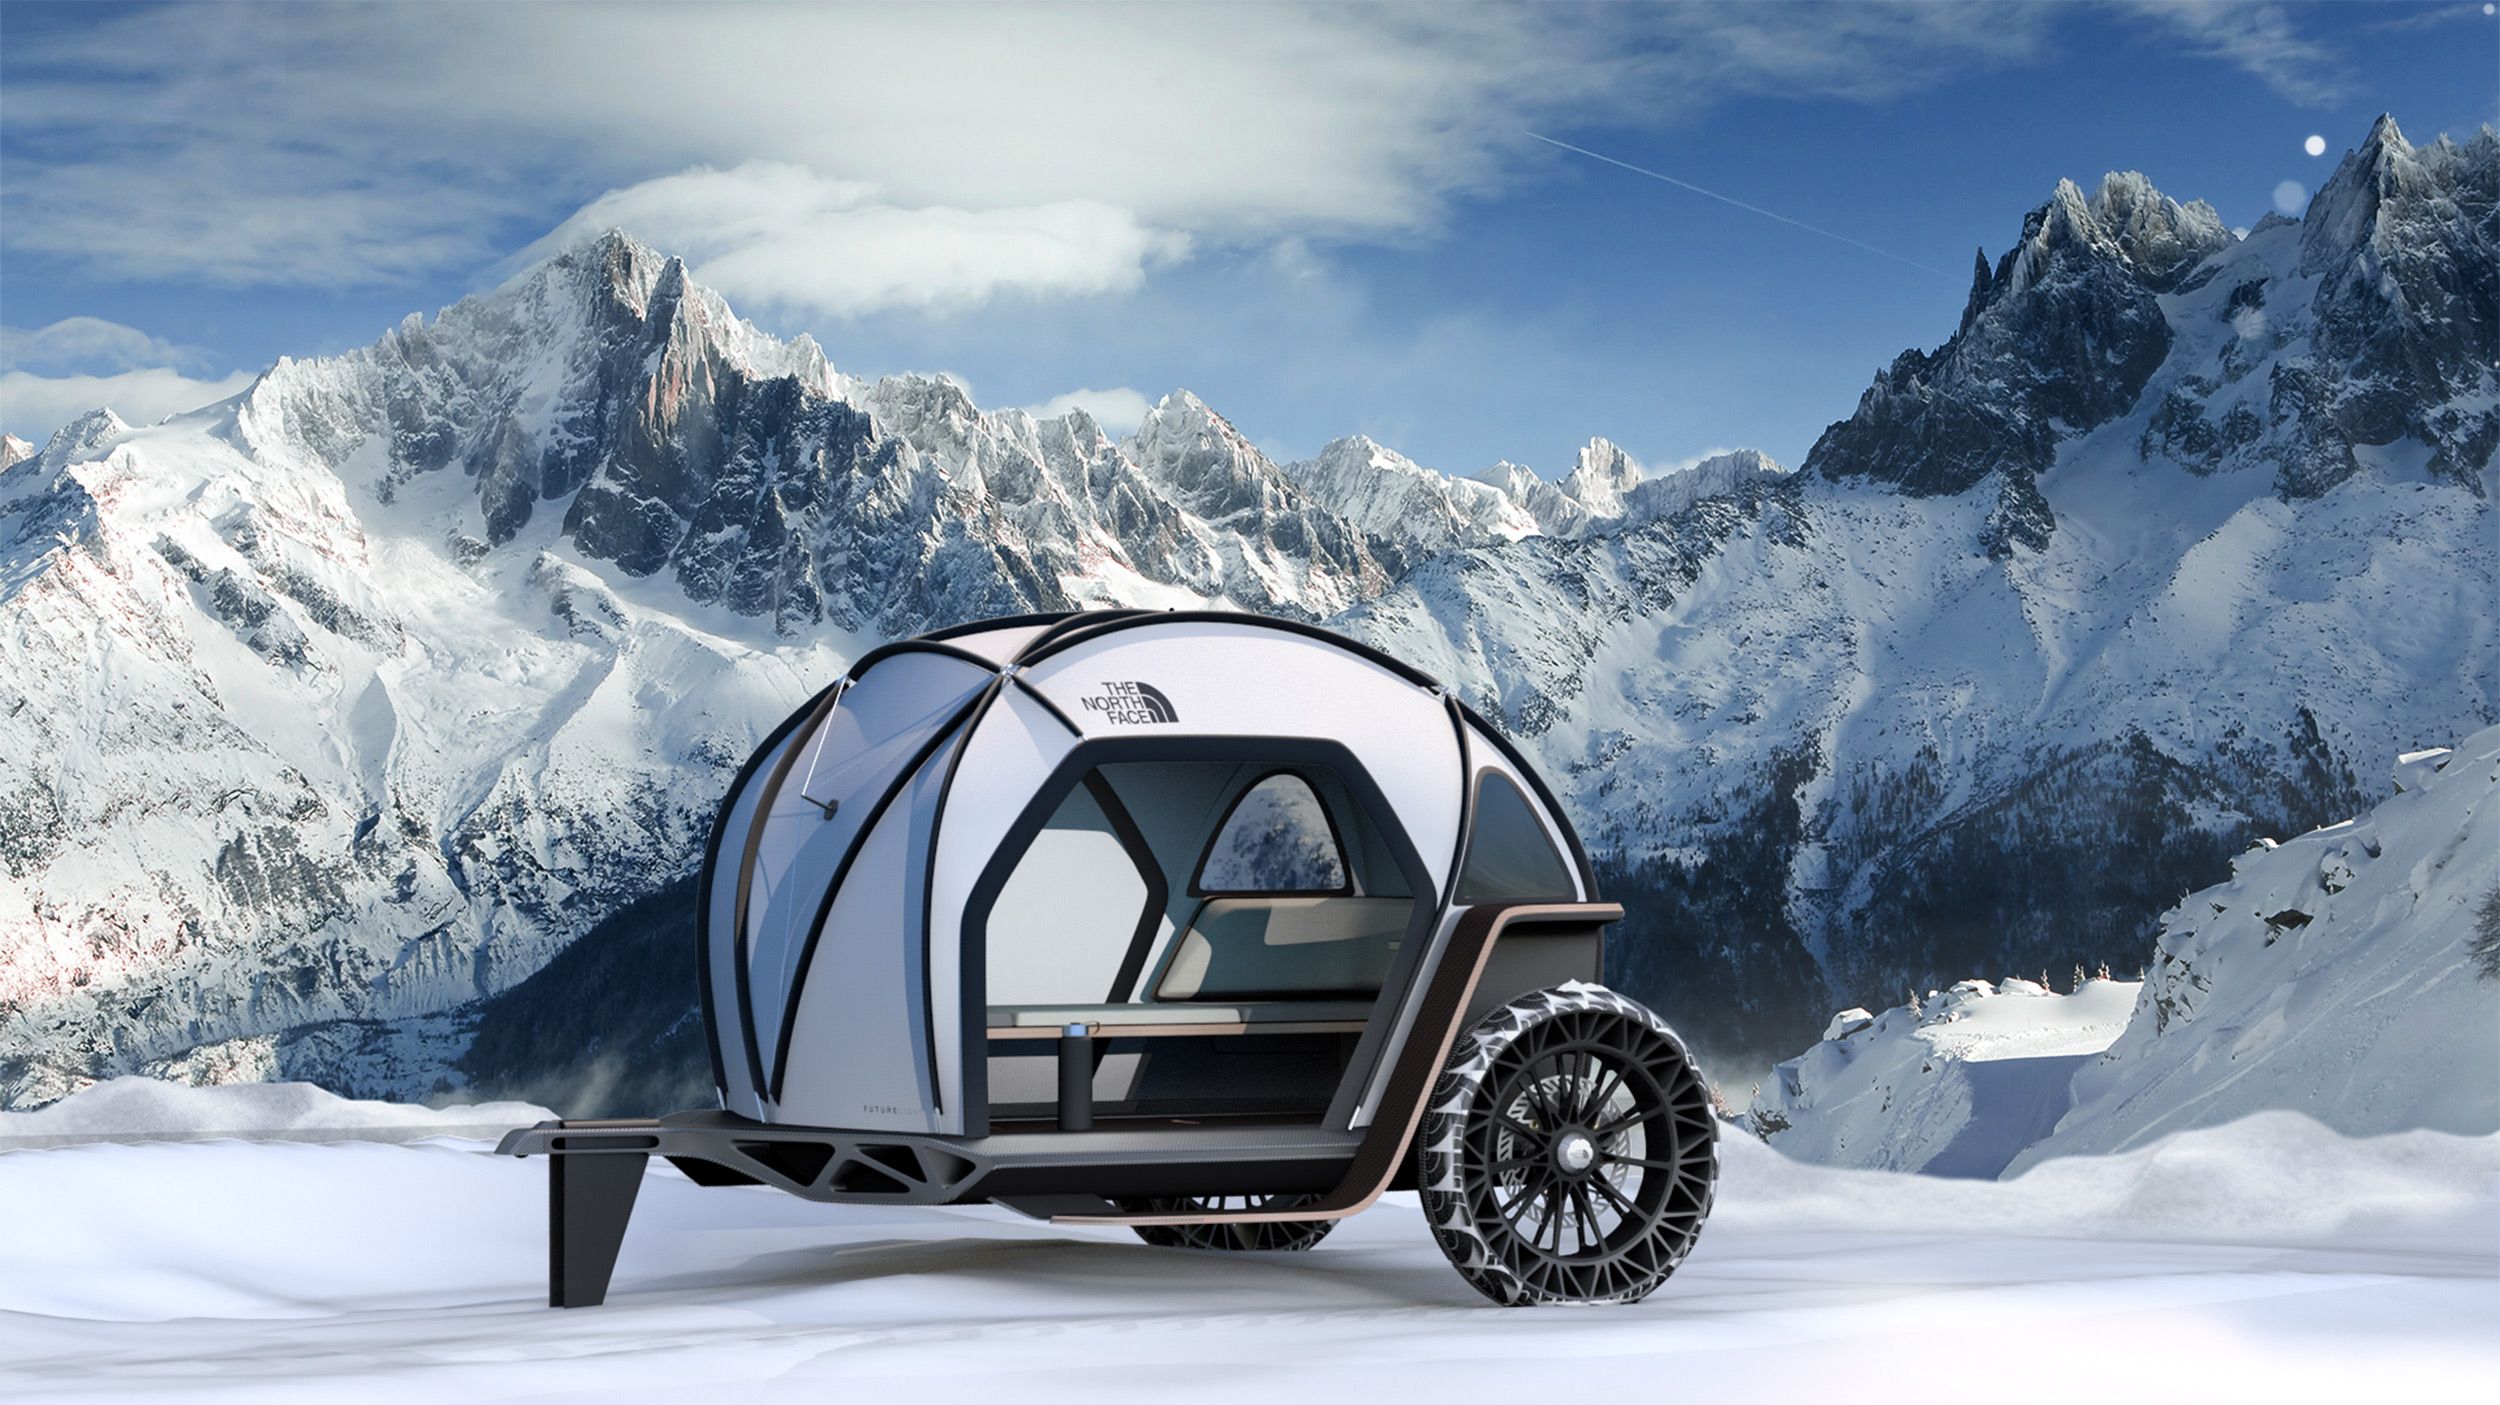 north face camper in snowy mountains